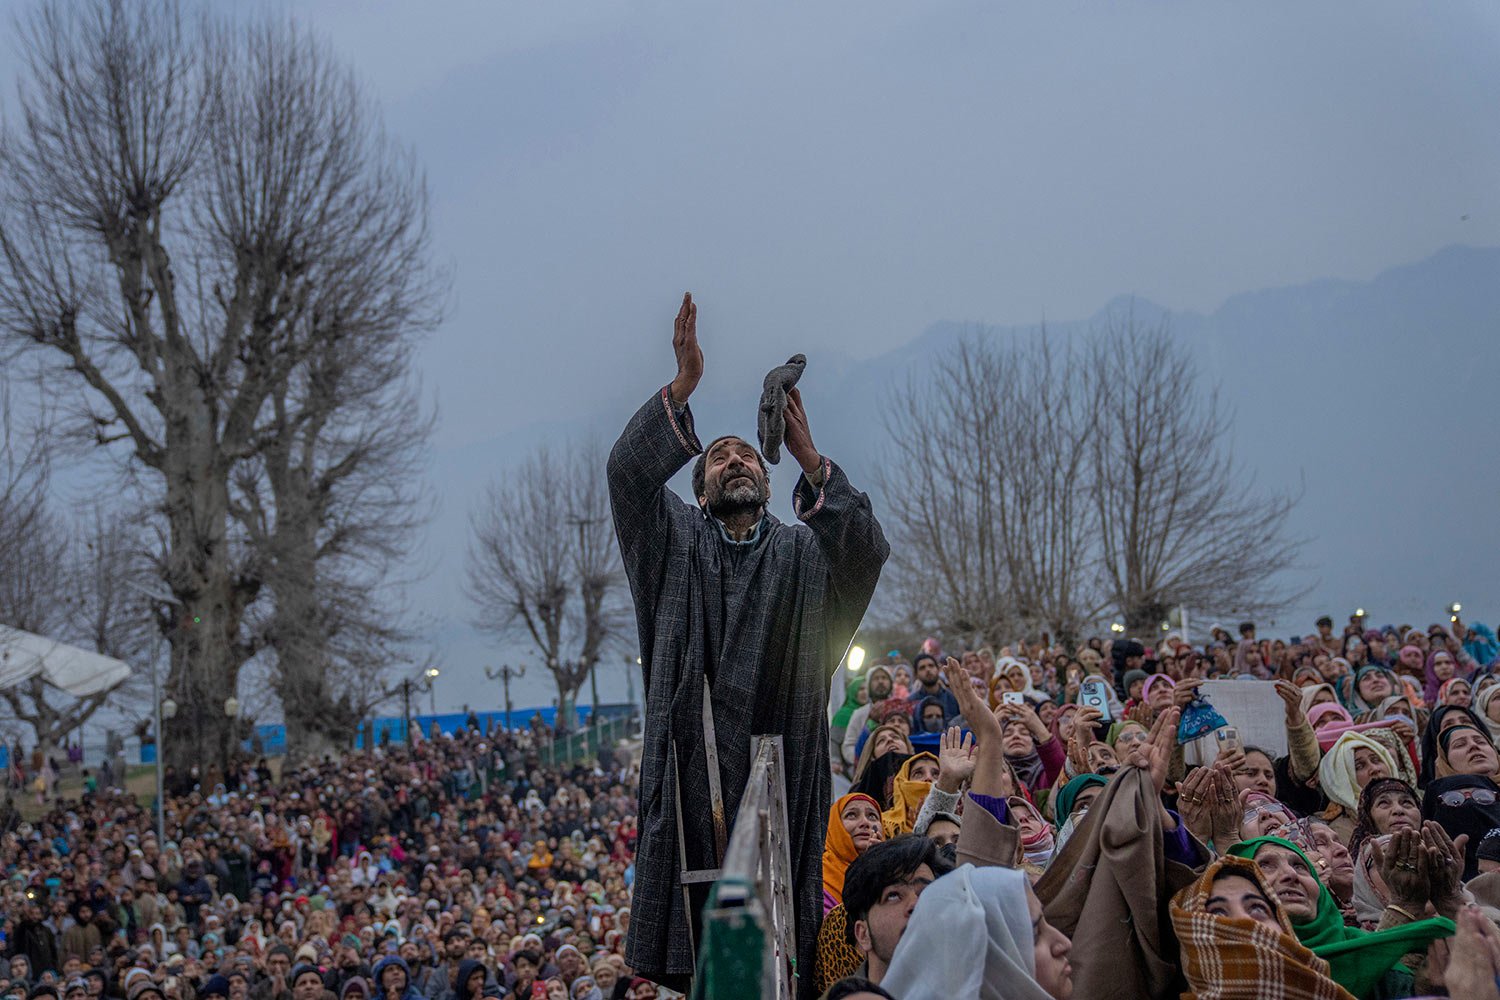  Kashmiri Muslims pray as the head priest displays a relic at the Hazratbal shrine on the occasion of Mehraj-u-Alam, believed to mark the ascension of Prophet Muhammad to heaven, in Srinagar, Indian-controlled Kashmir, Sunday, Feb. 19, 2023.  (AP Pho